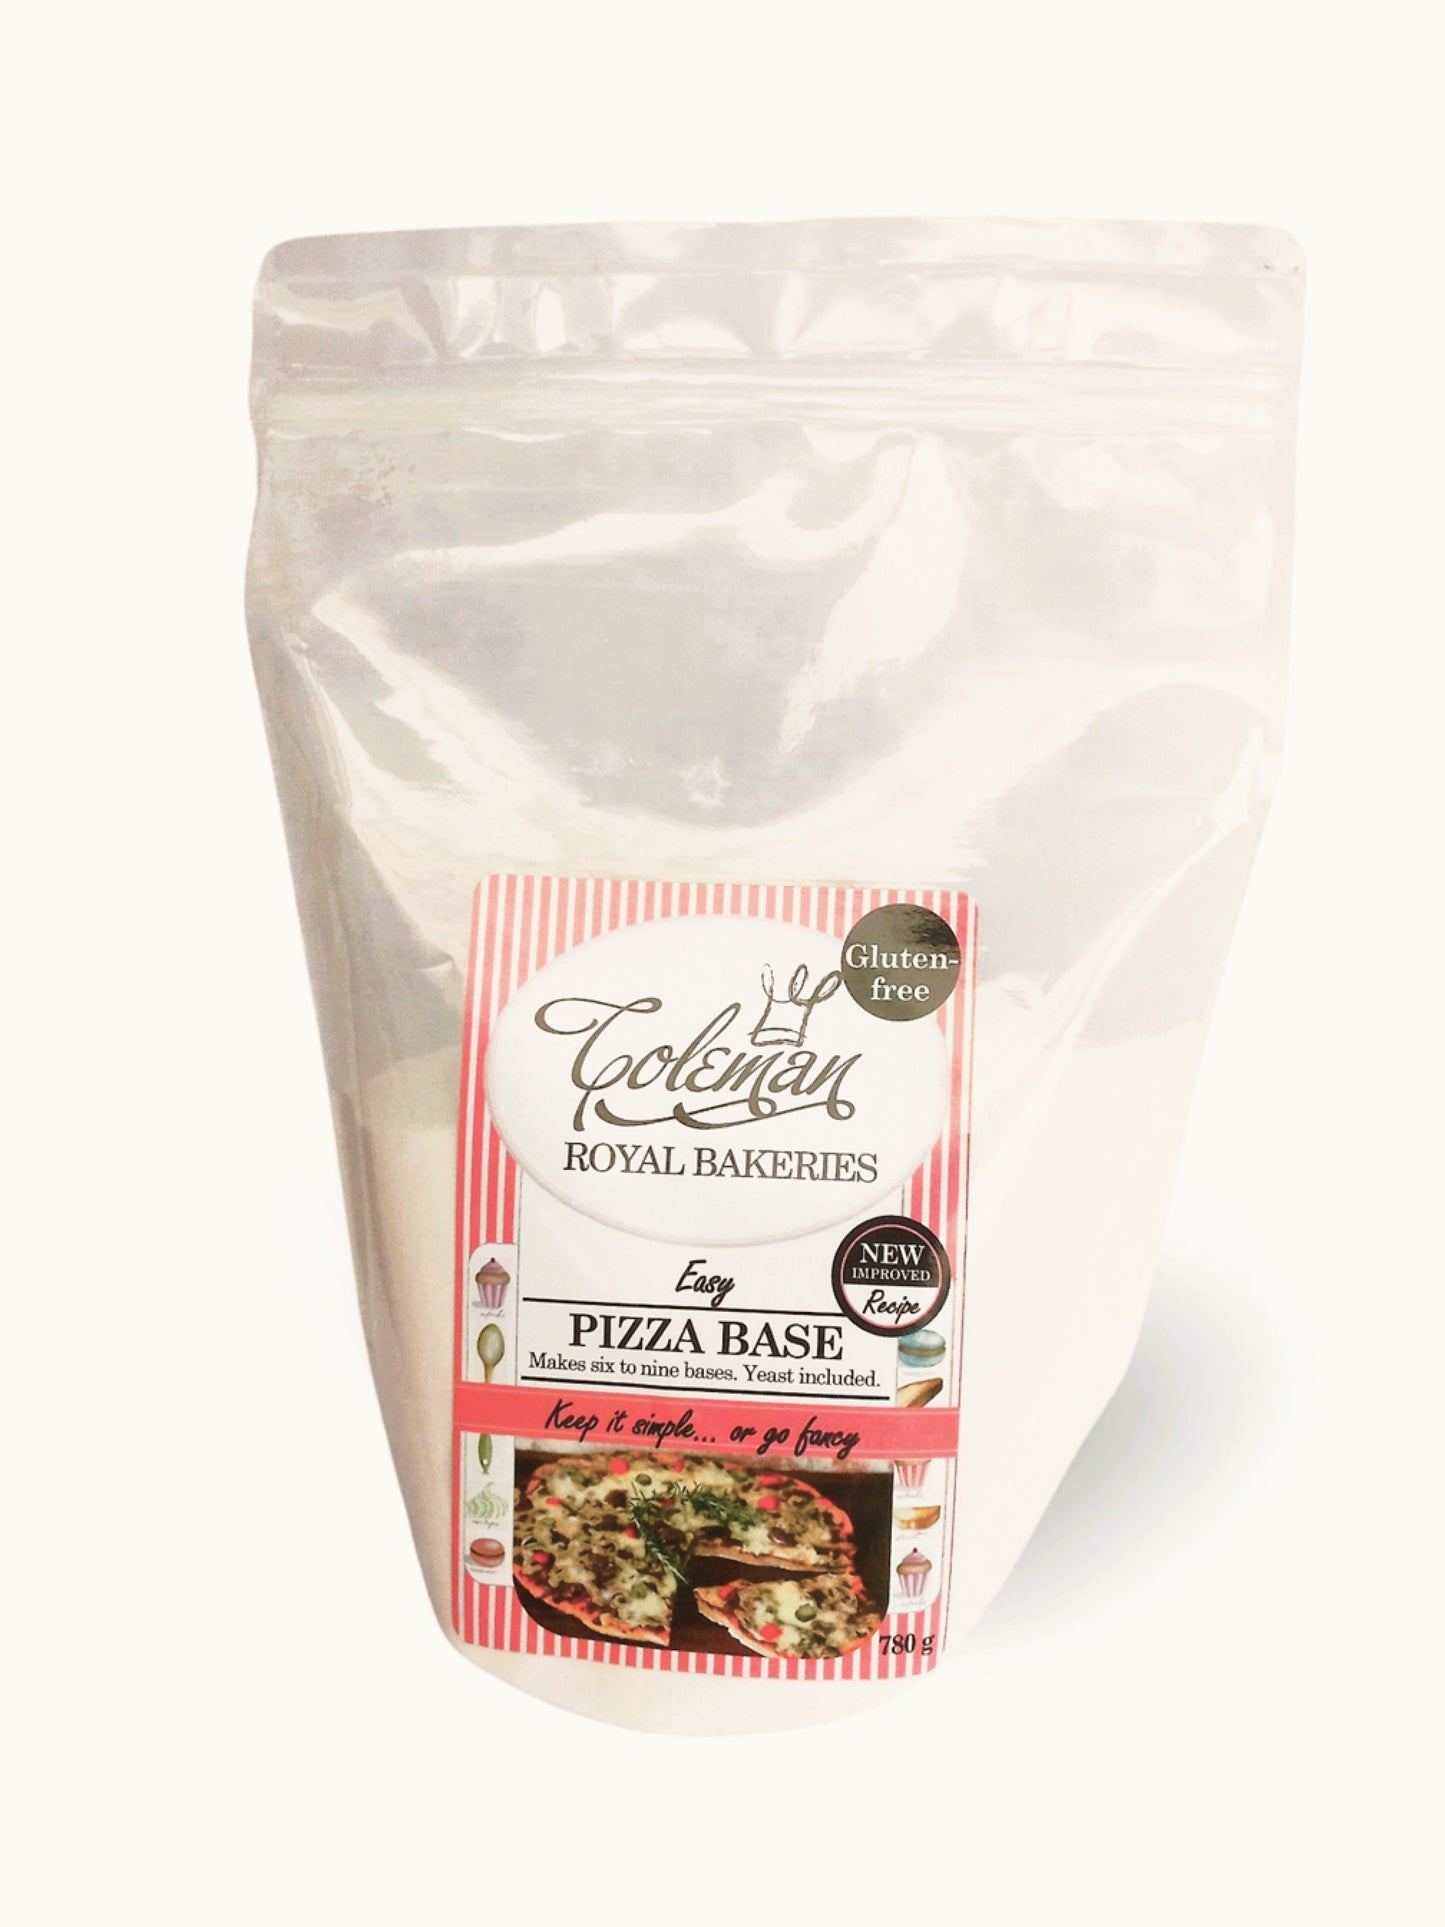 Pizza Base, makes 6-9 bases (Gluten-free). 750 g + 3 x 10 g yeast sachet included - Coleman Royal Bakeries